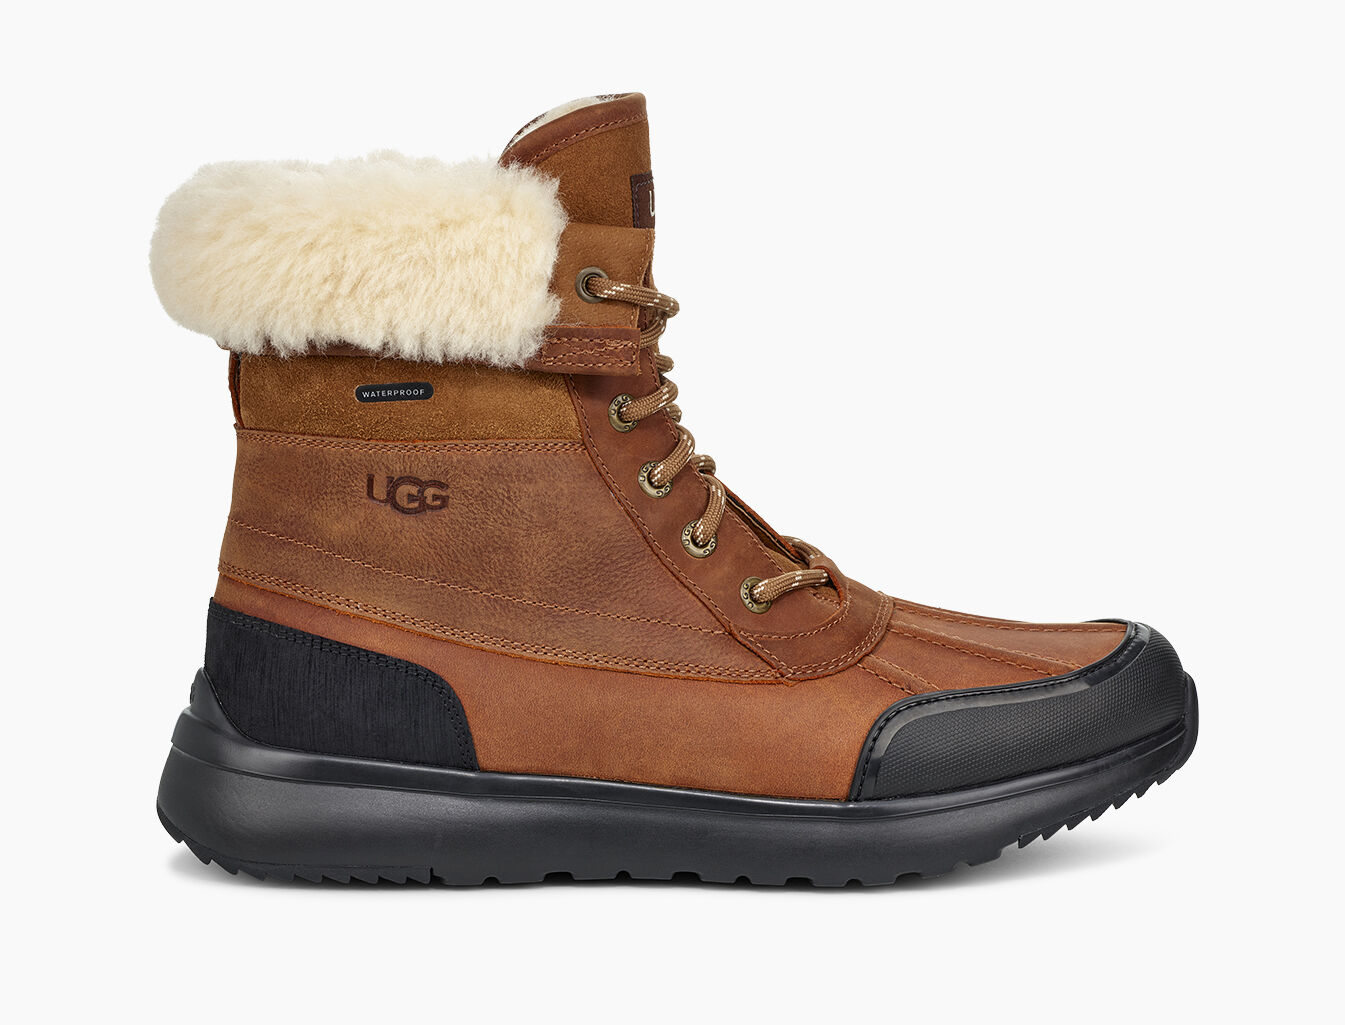 ugg avalanche butte boot review